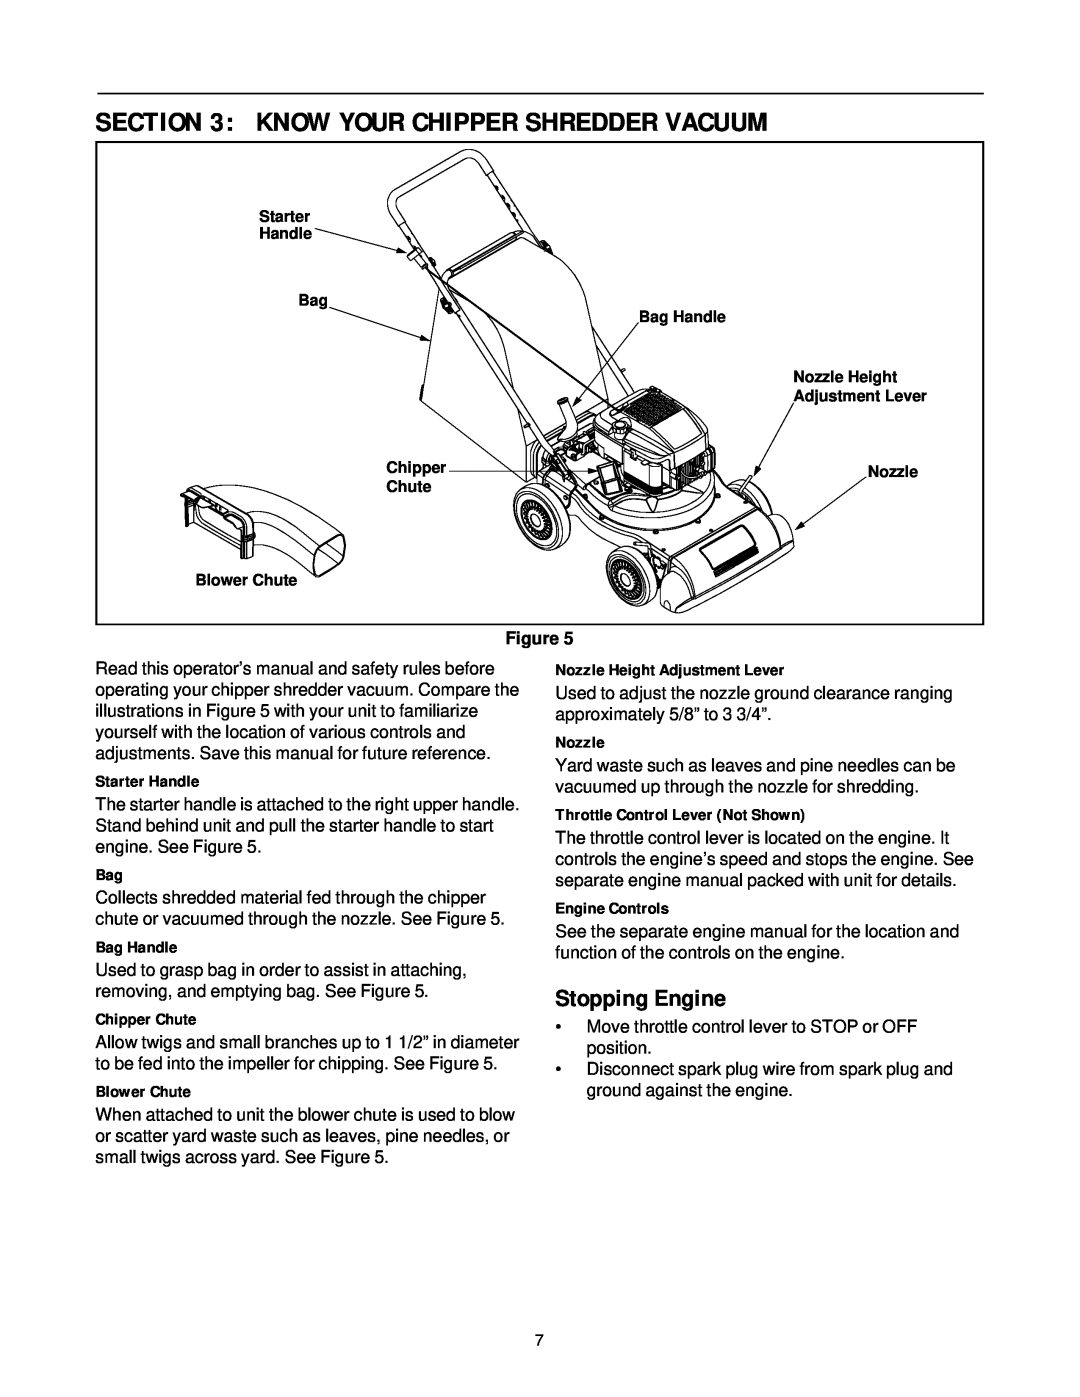 Cub Cadet 24A-030E100 manual Stopping Engine, Know Your Chipper Shredder Vacuum, Starter Handle, Bag Handle, Chipper Chute 